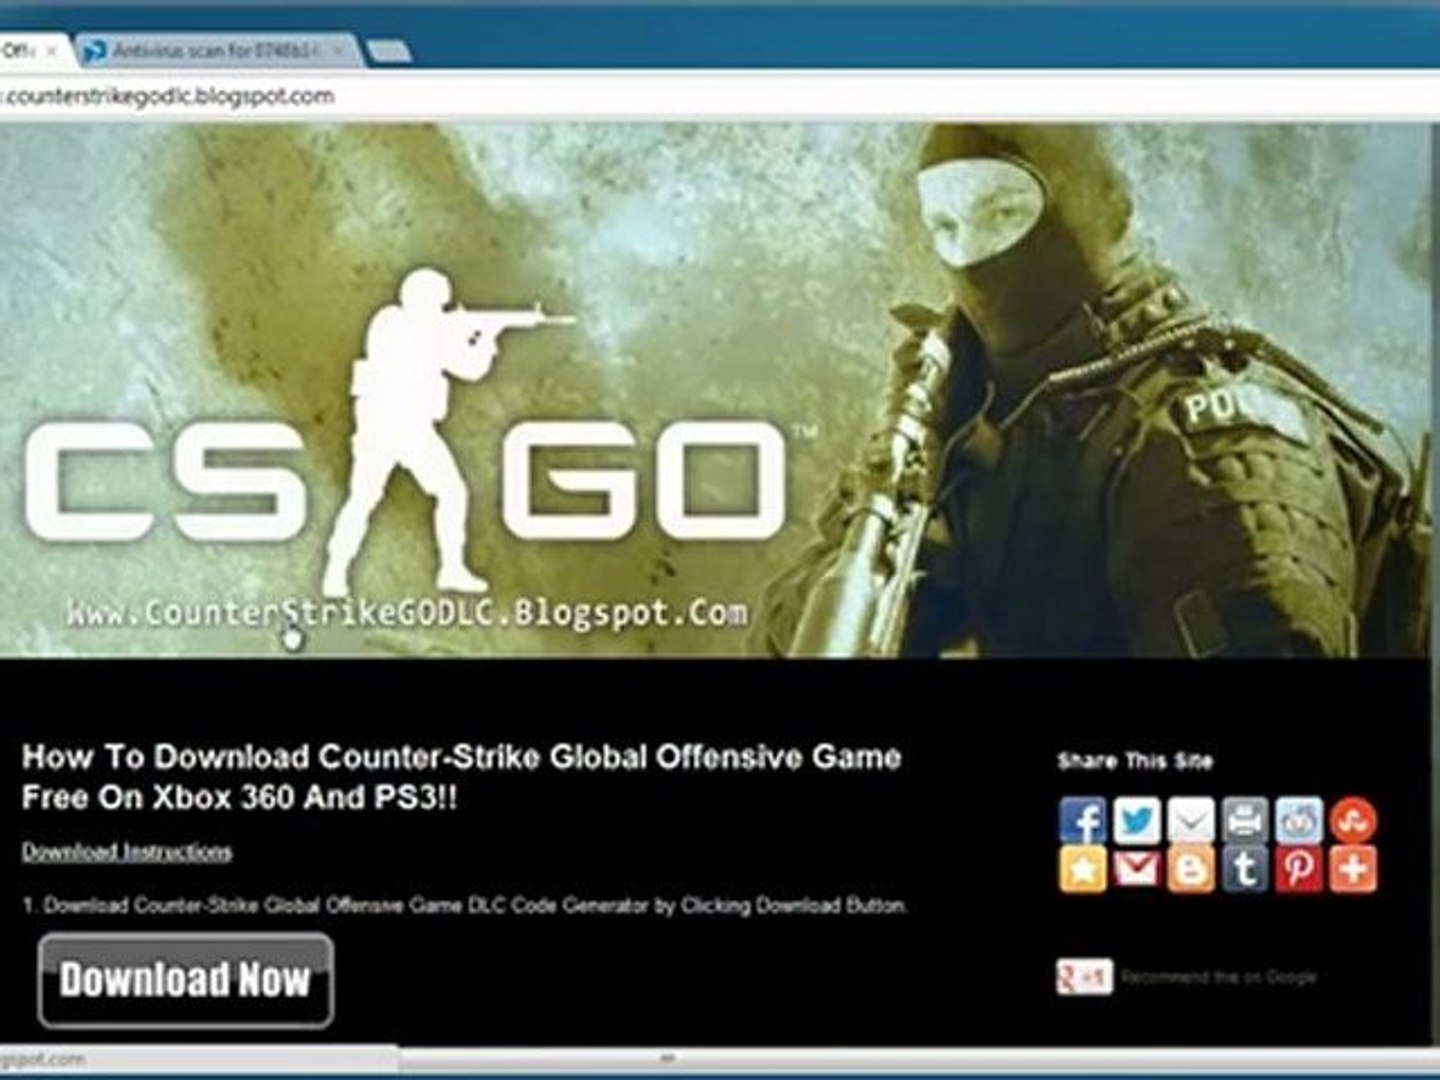 Minecraft Roblox Counter-Strike: Global Offensive Xbox 360 Video